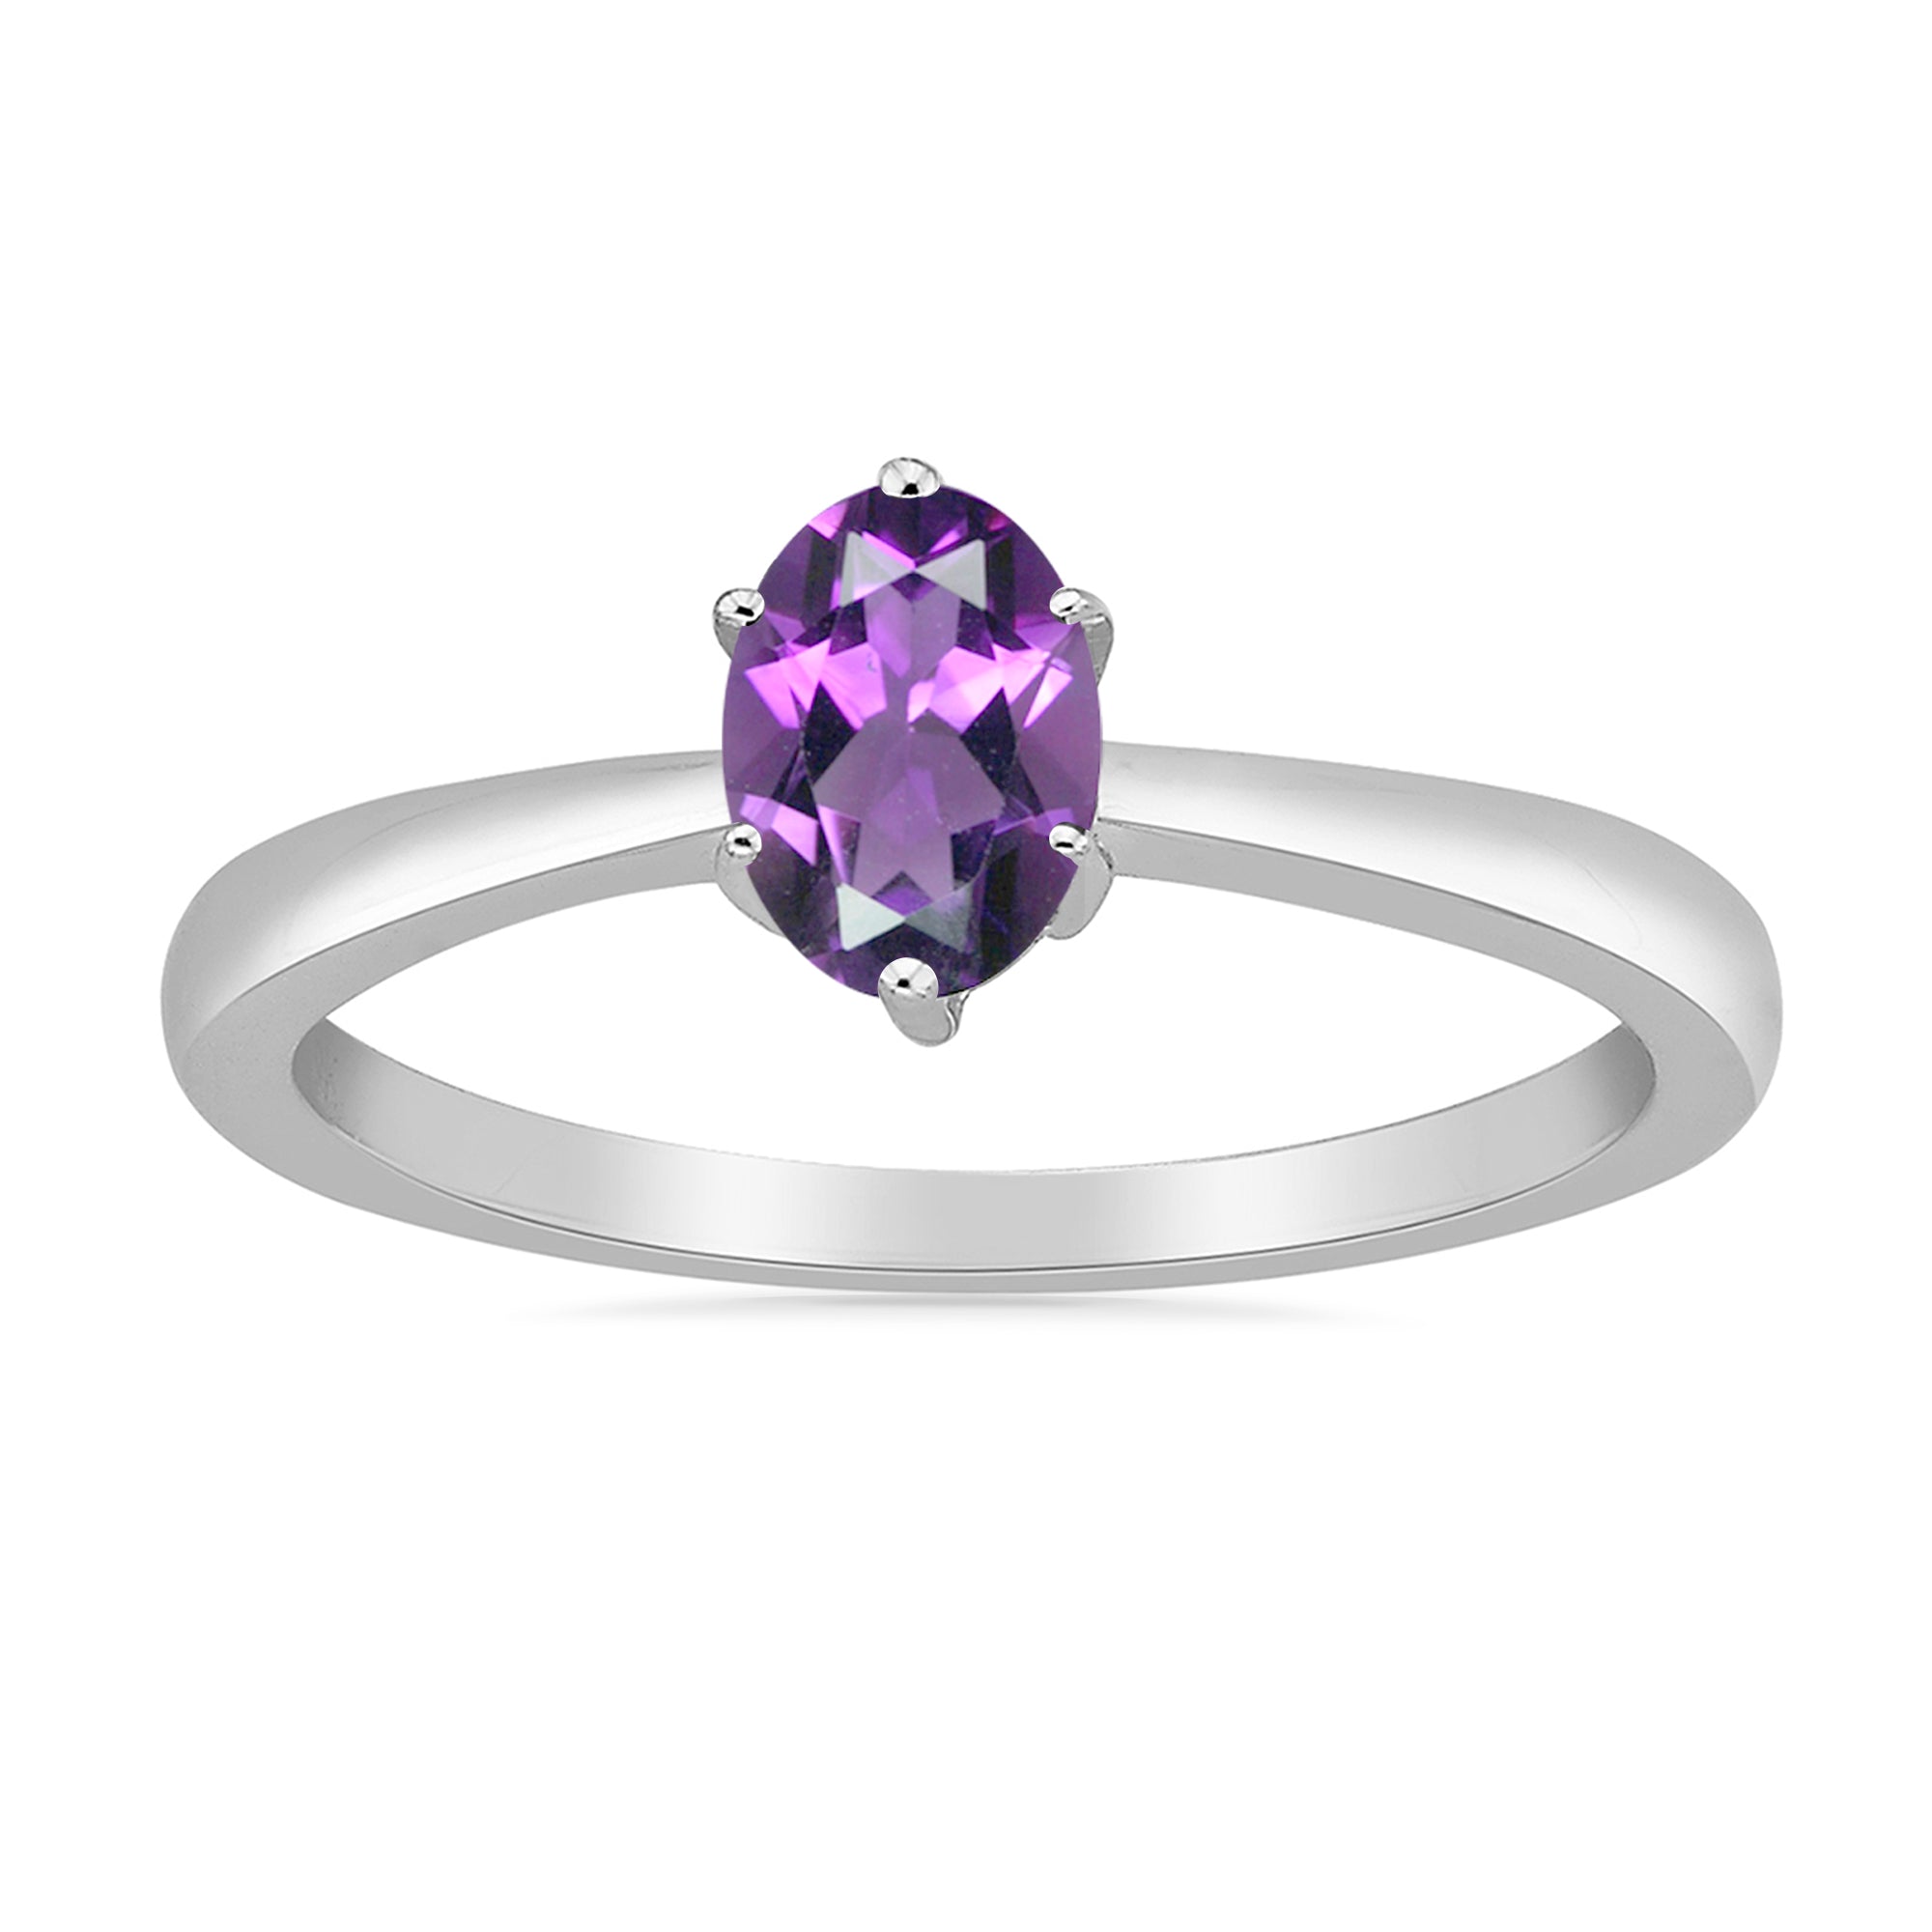 9ct white gold checkerboard cut  6x4mm oval amethyst ring